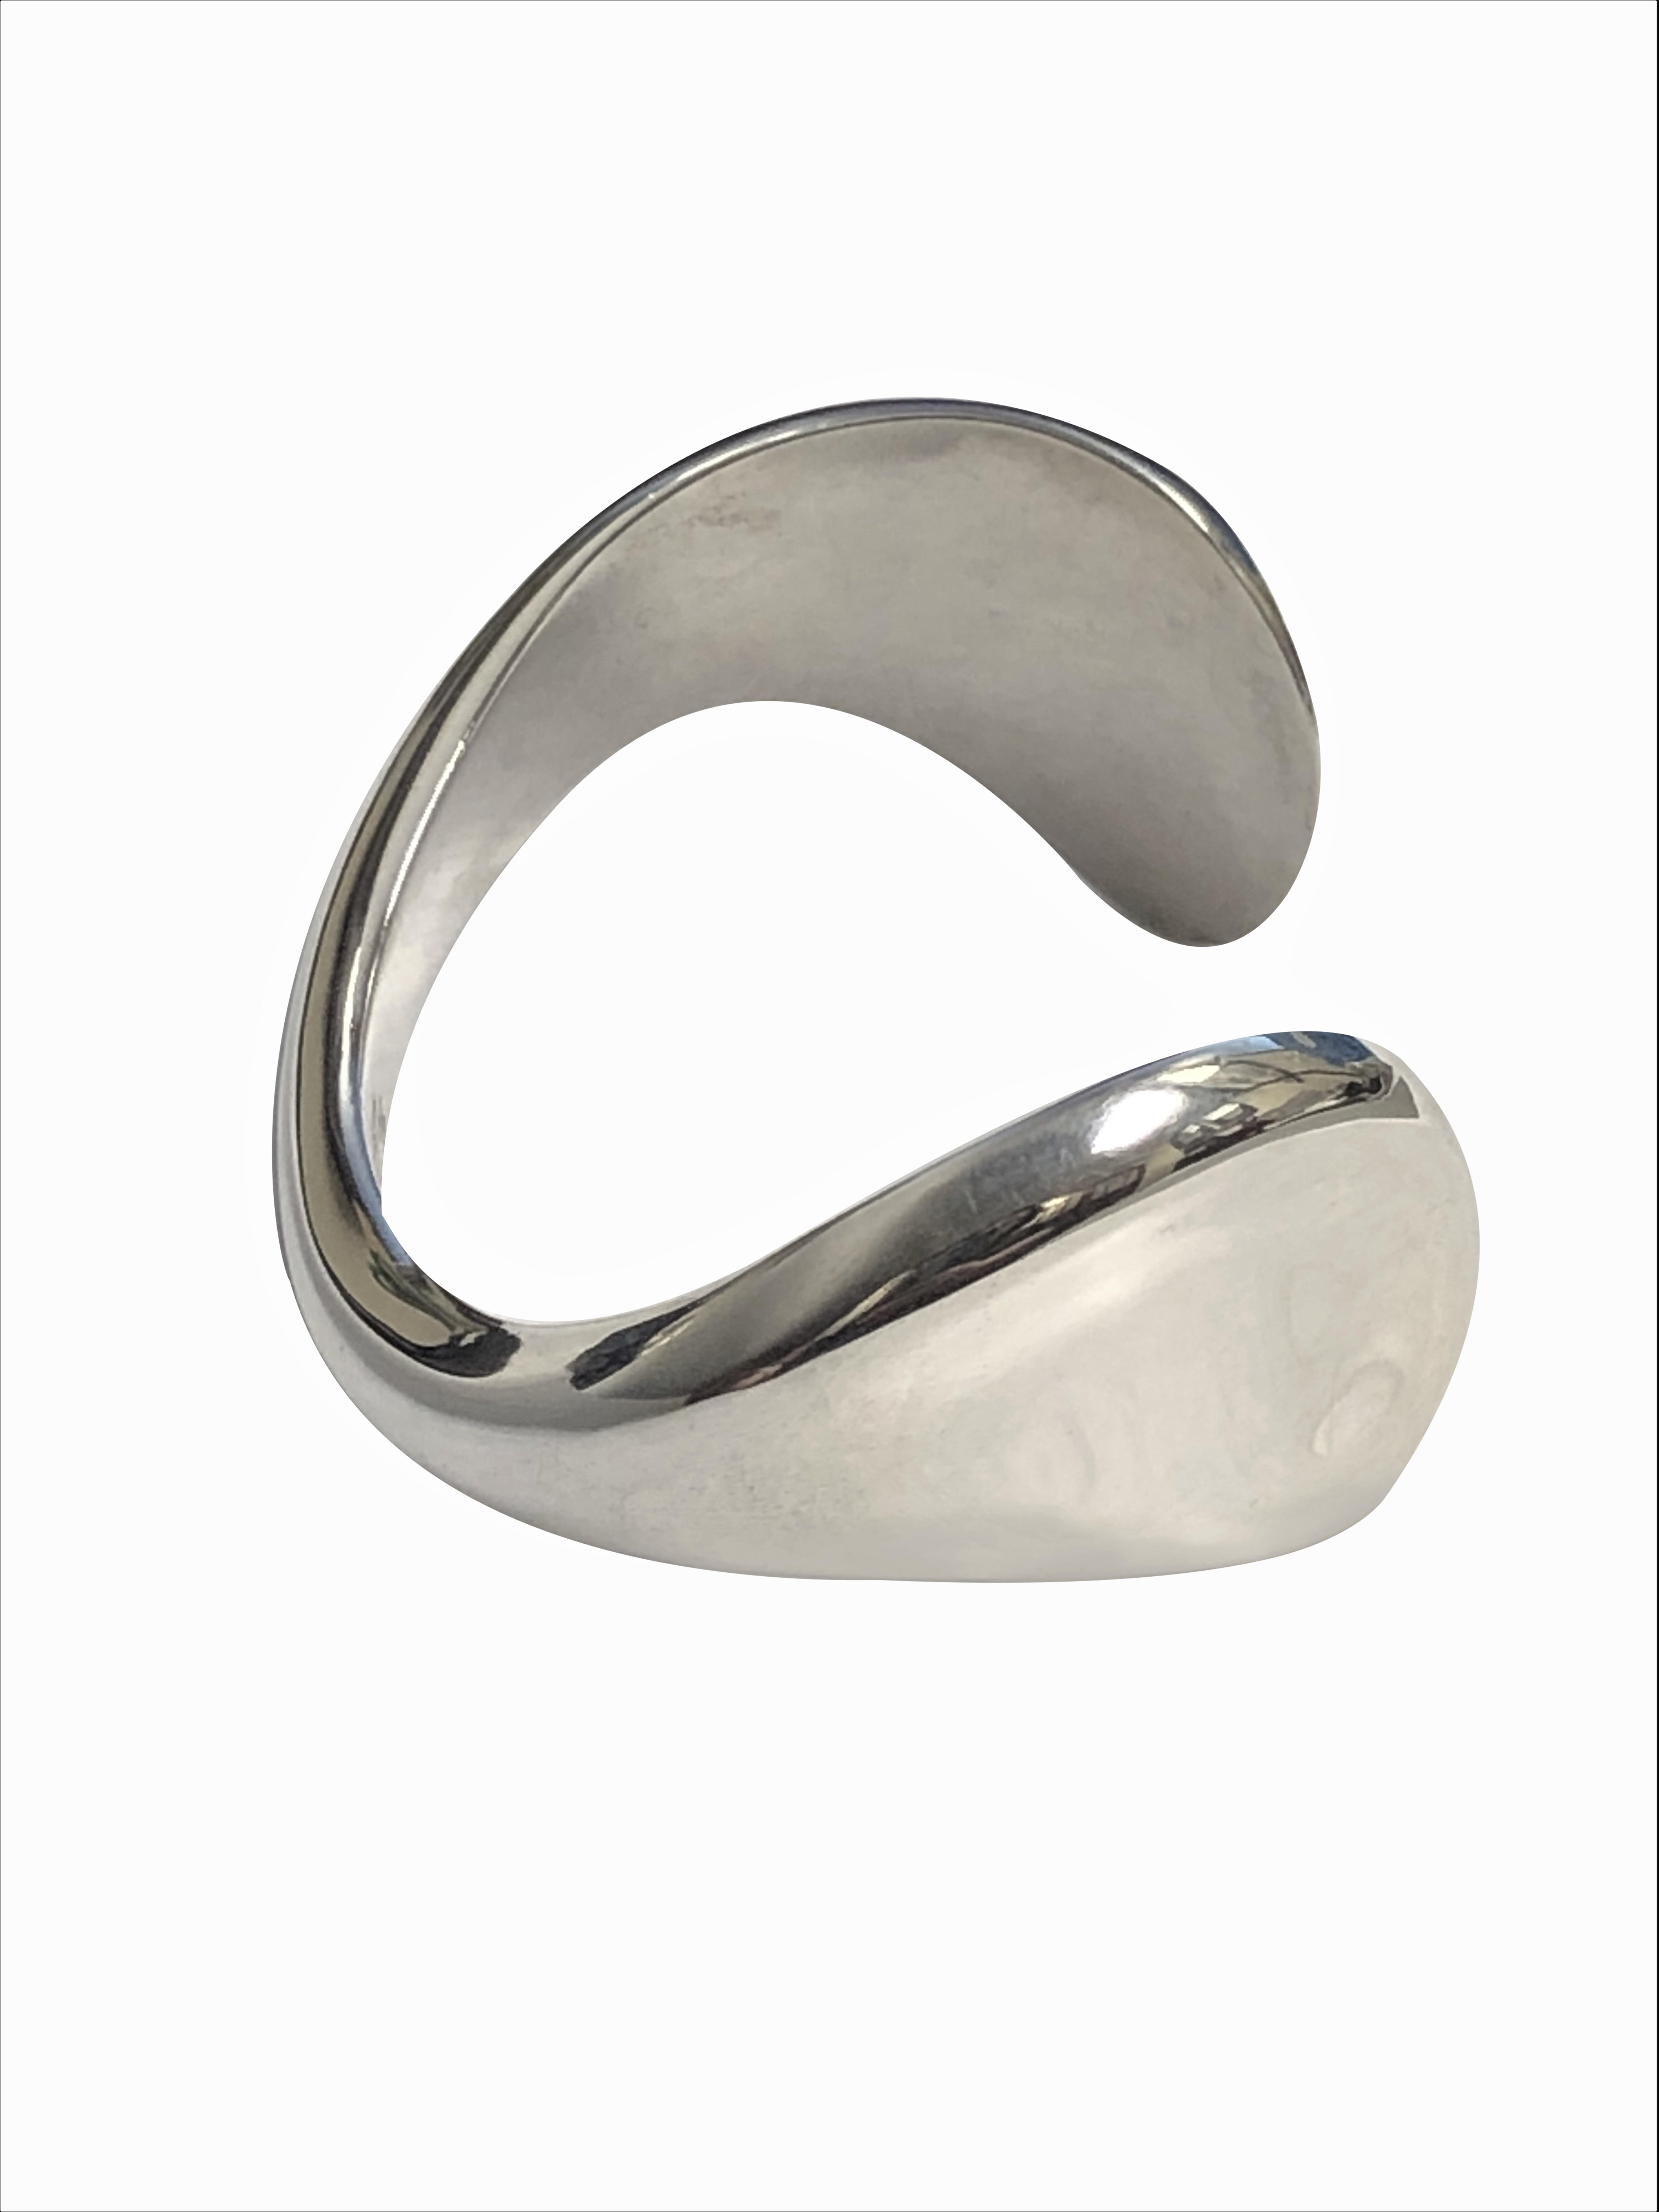 Circa 1990s Elsa Peretti for Tiffany & Company Sterling Silver Thumb Print collection cuff Bracelet. Having an inside wrist measurement of 6 inches with a 1 1/8 inches and is slightly adjustable. 